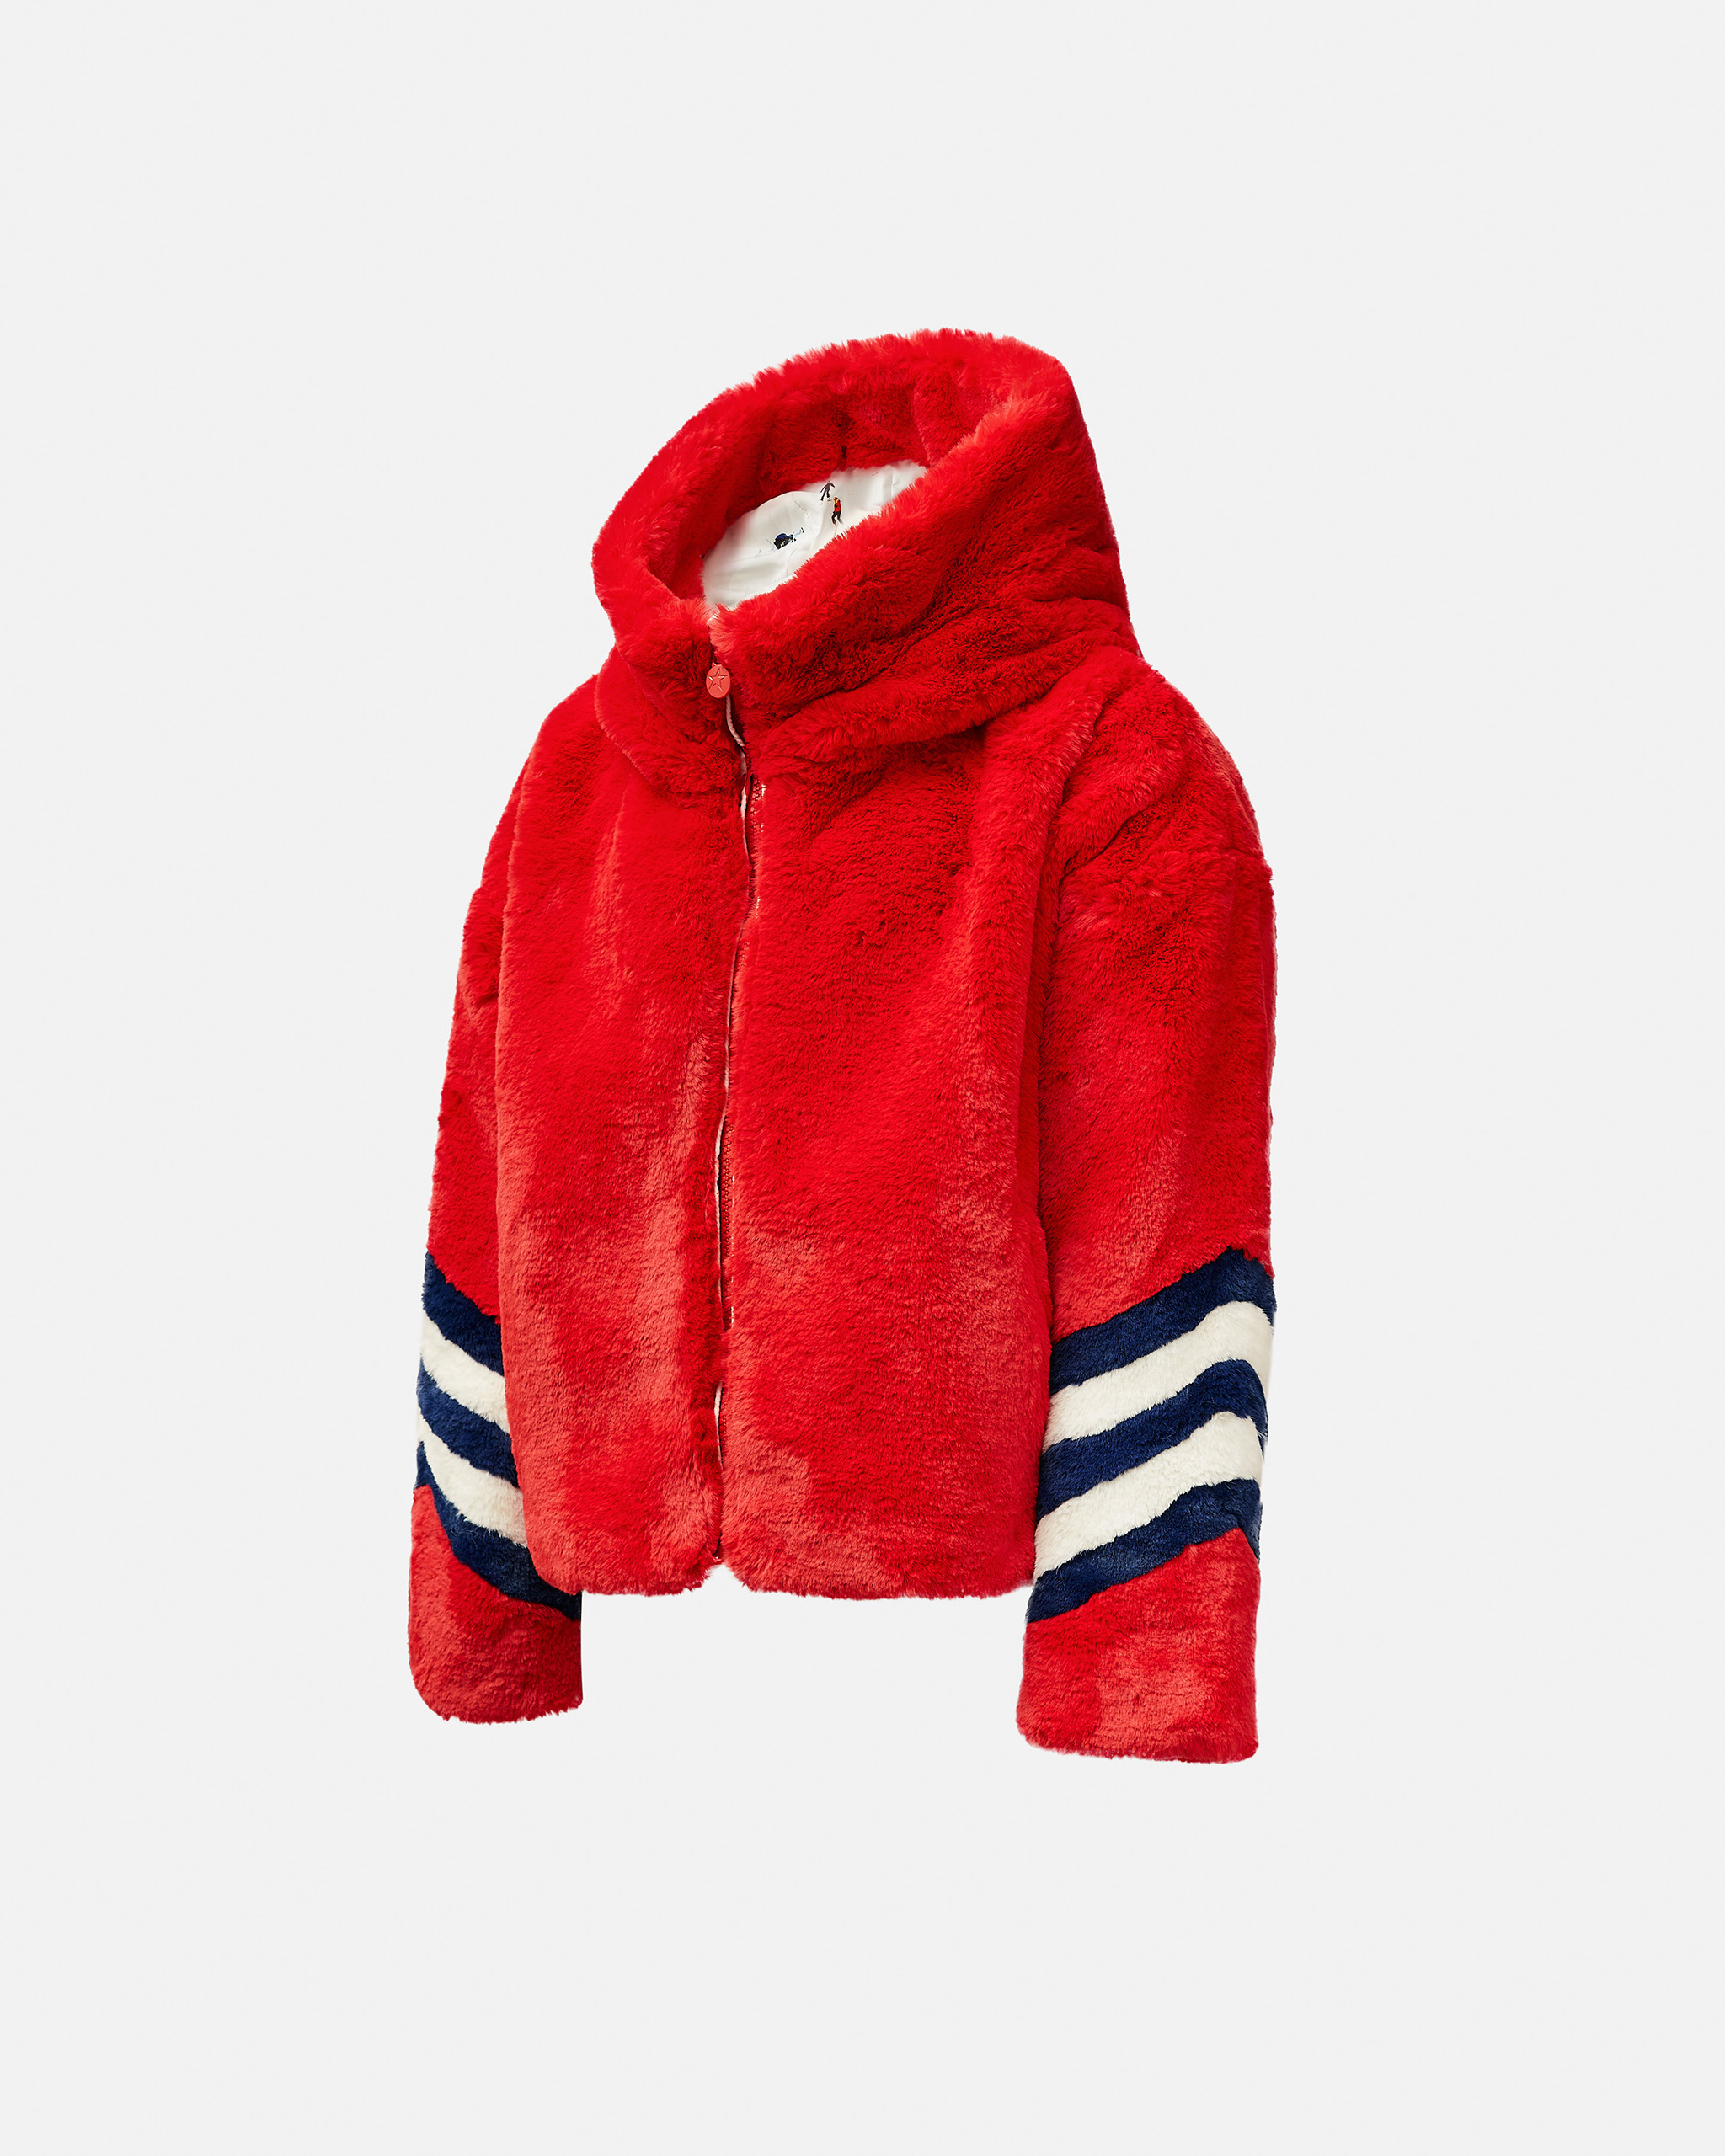 Perfect Moment Noelle Faux Fur Bomber Jacket Y6 In Red